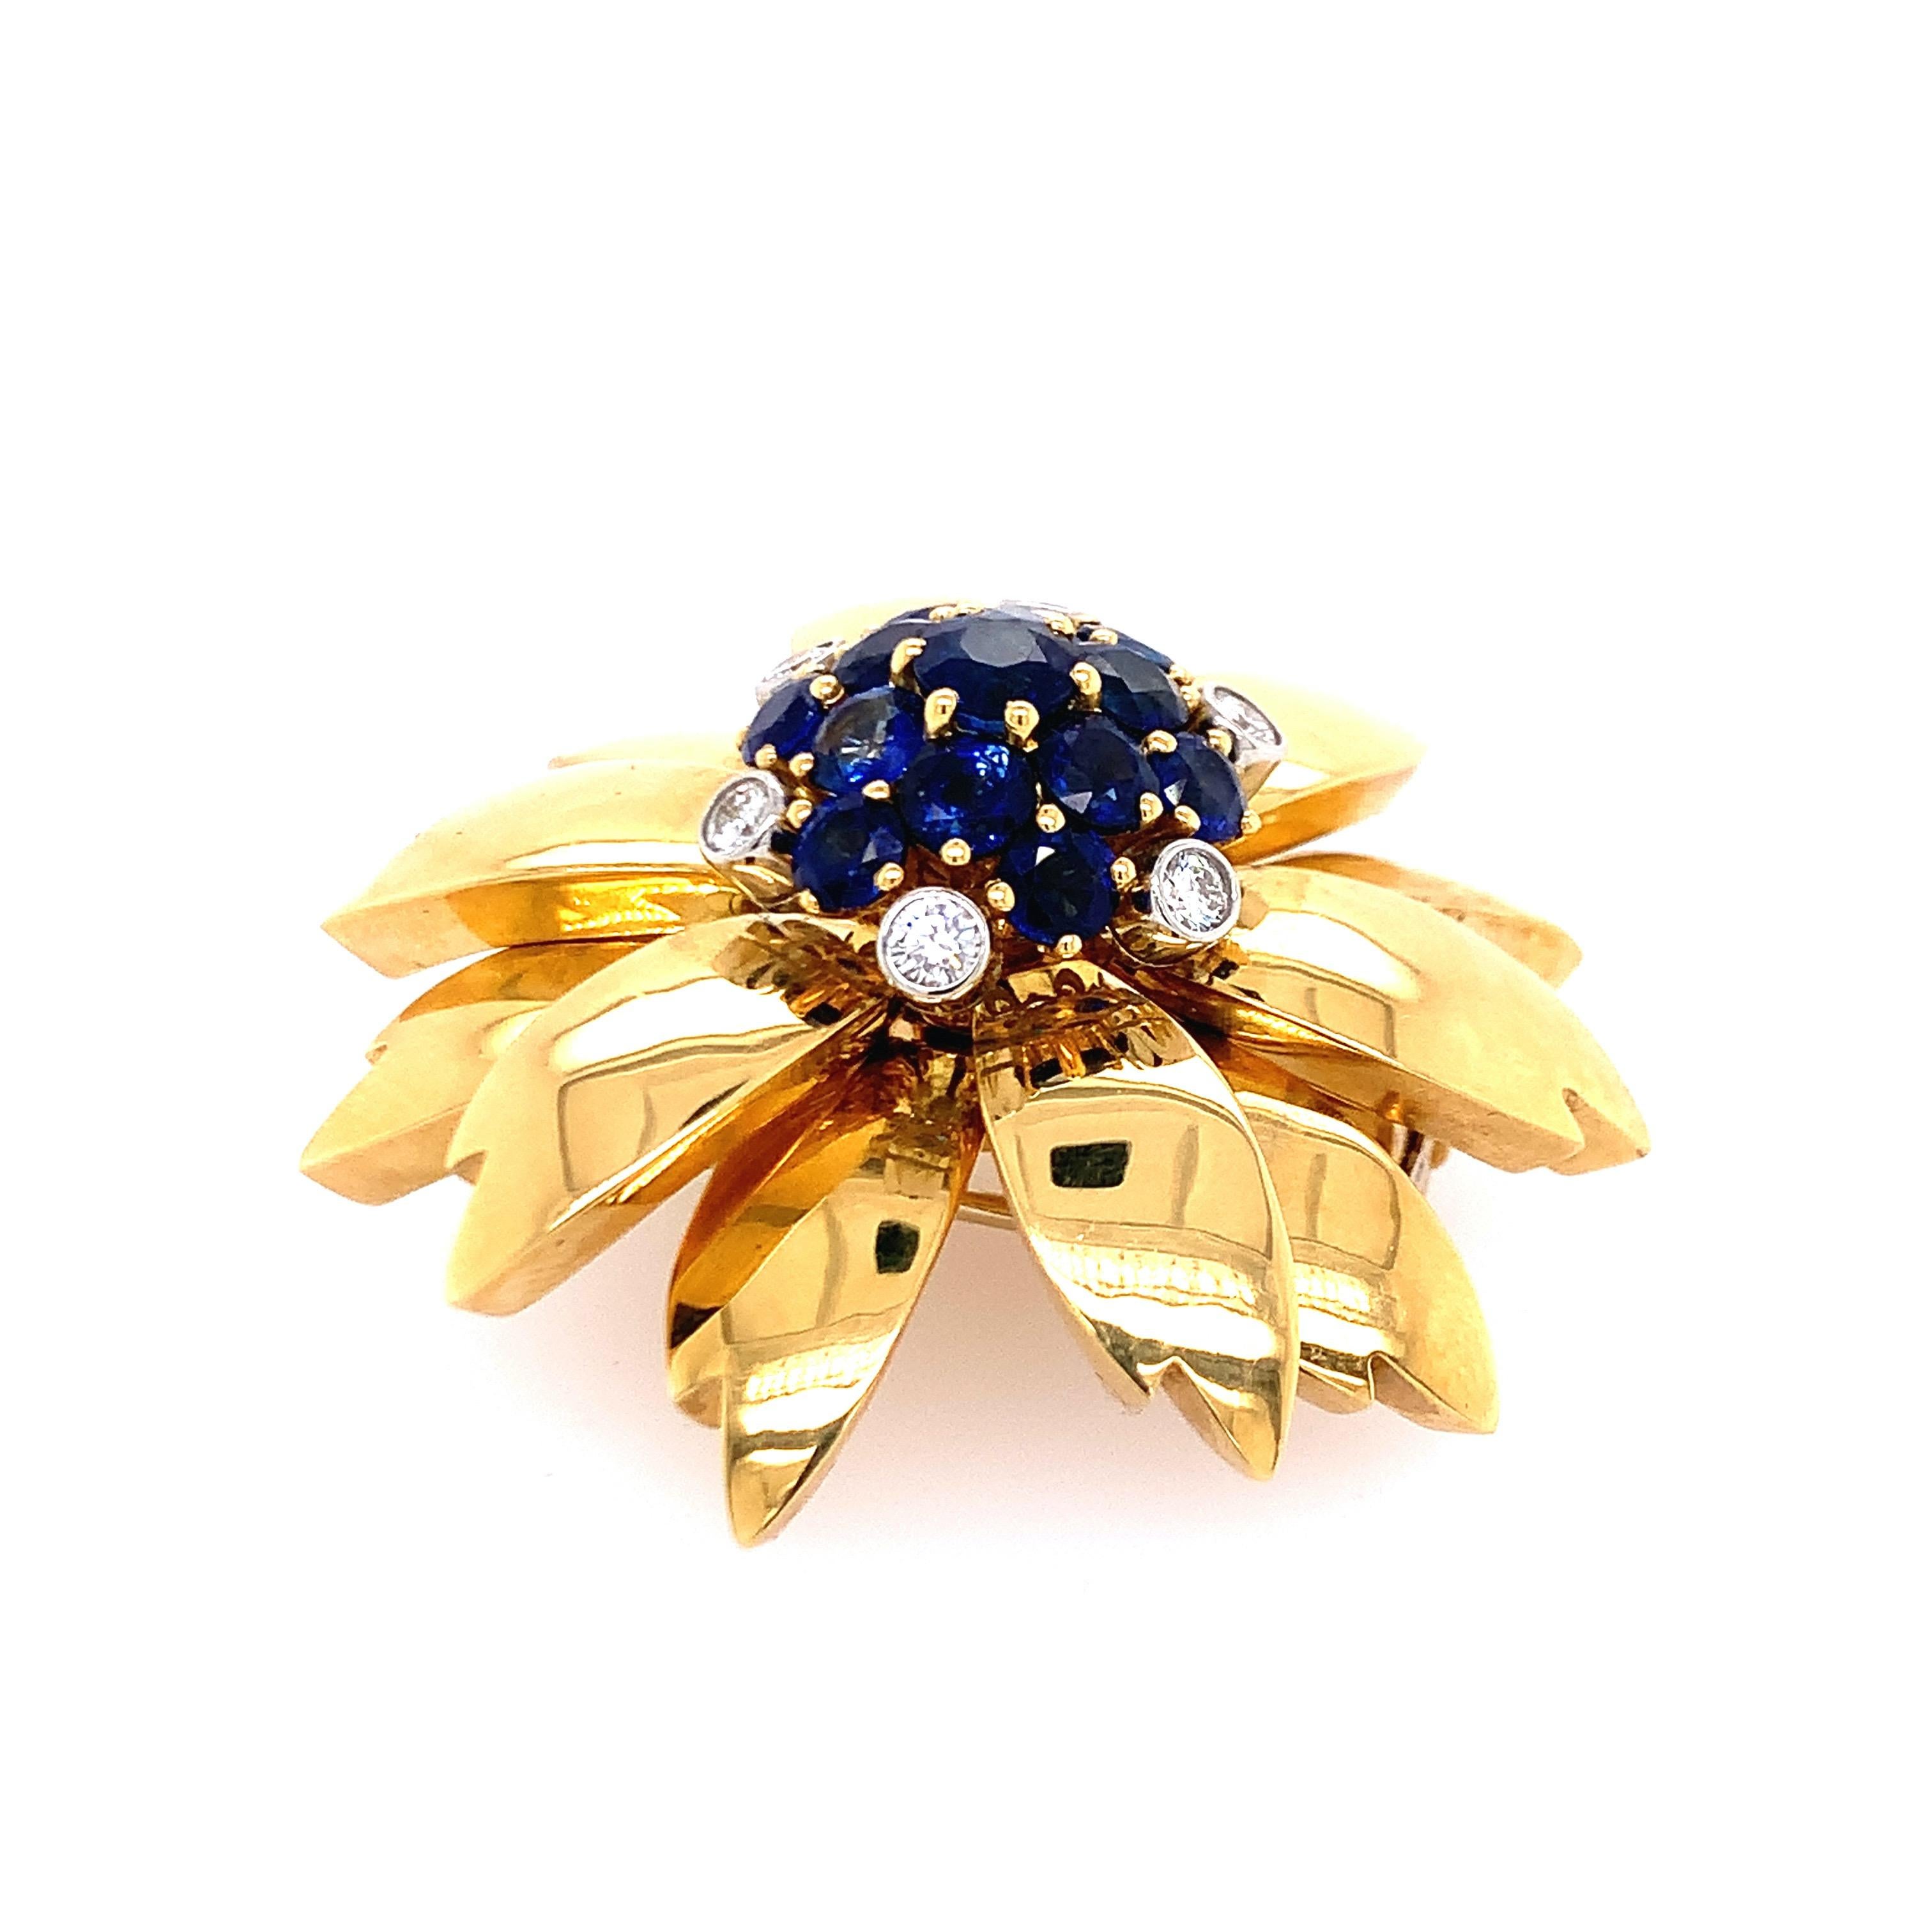 Aletto Brothers Gold, Platinum, Sapphire and Diamond Flower Clip-Brooch In Excellent Condition For Sale In New York, NY